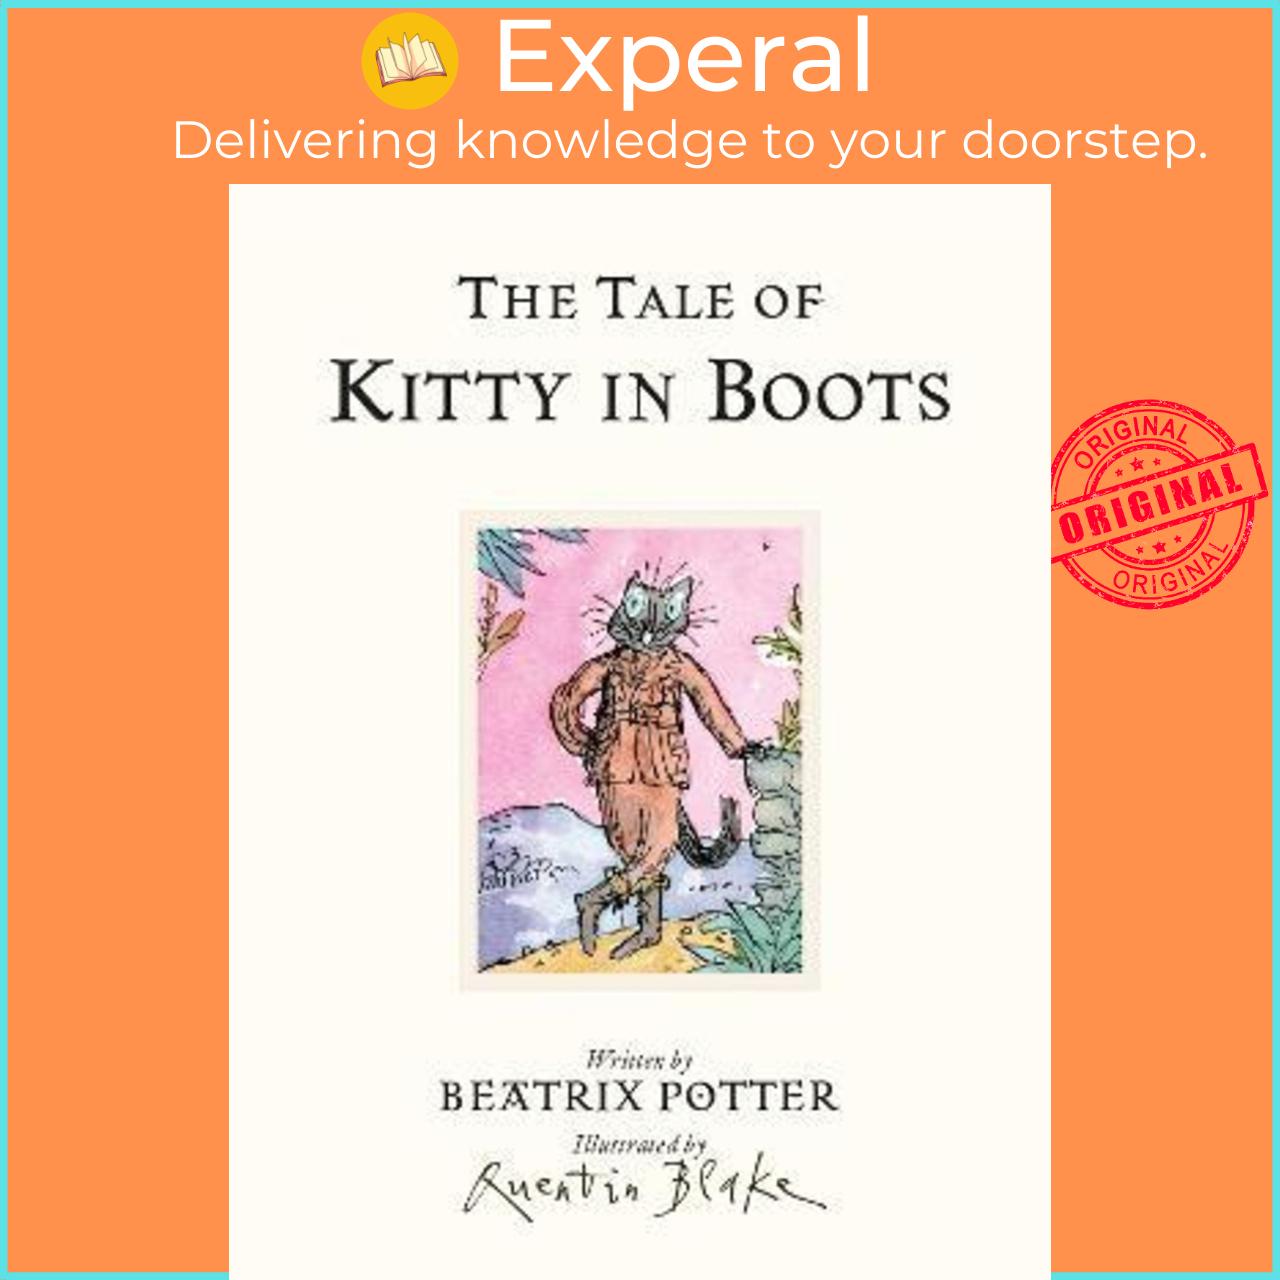 Sách - The Tale of Kitty In Boots by Beatrix Potter (UK edition, hardcover)